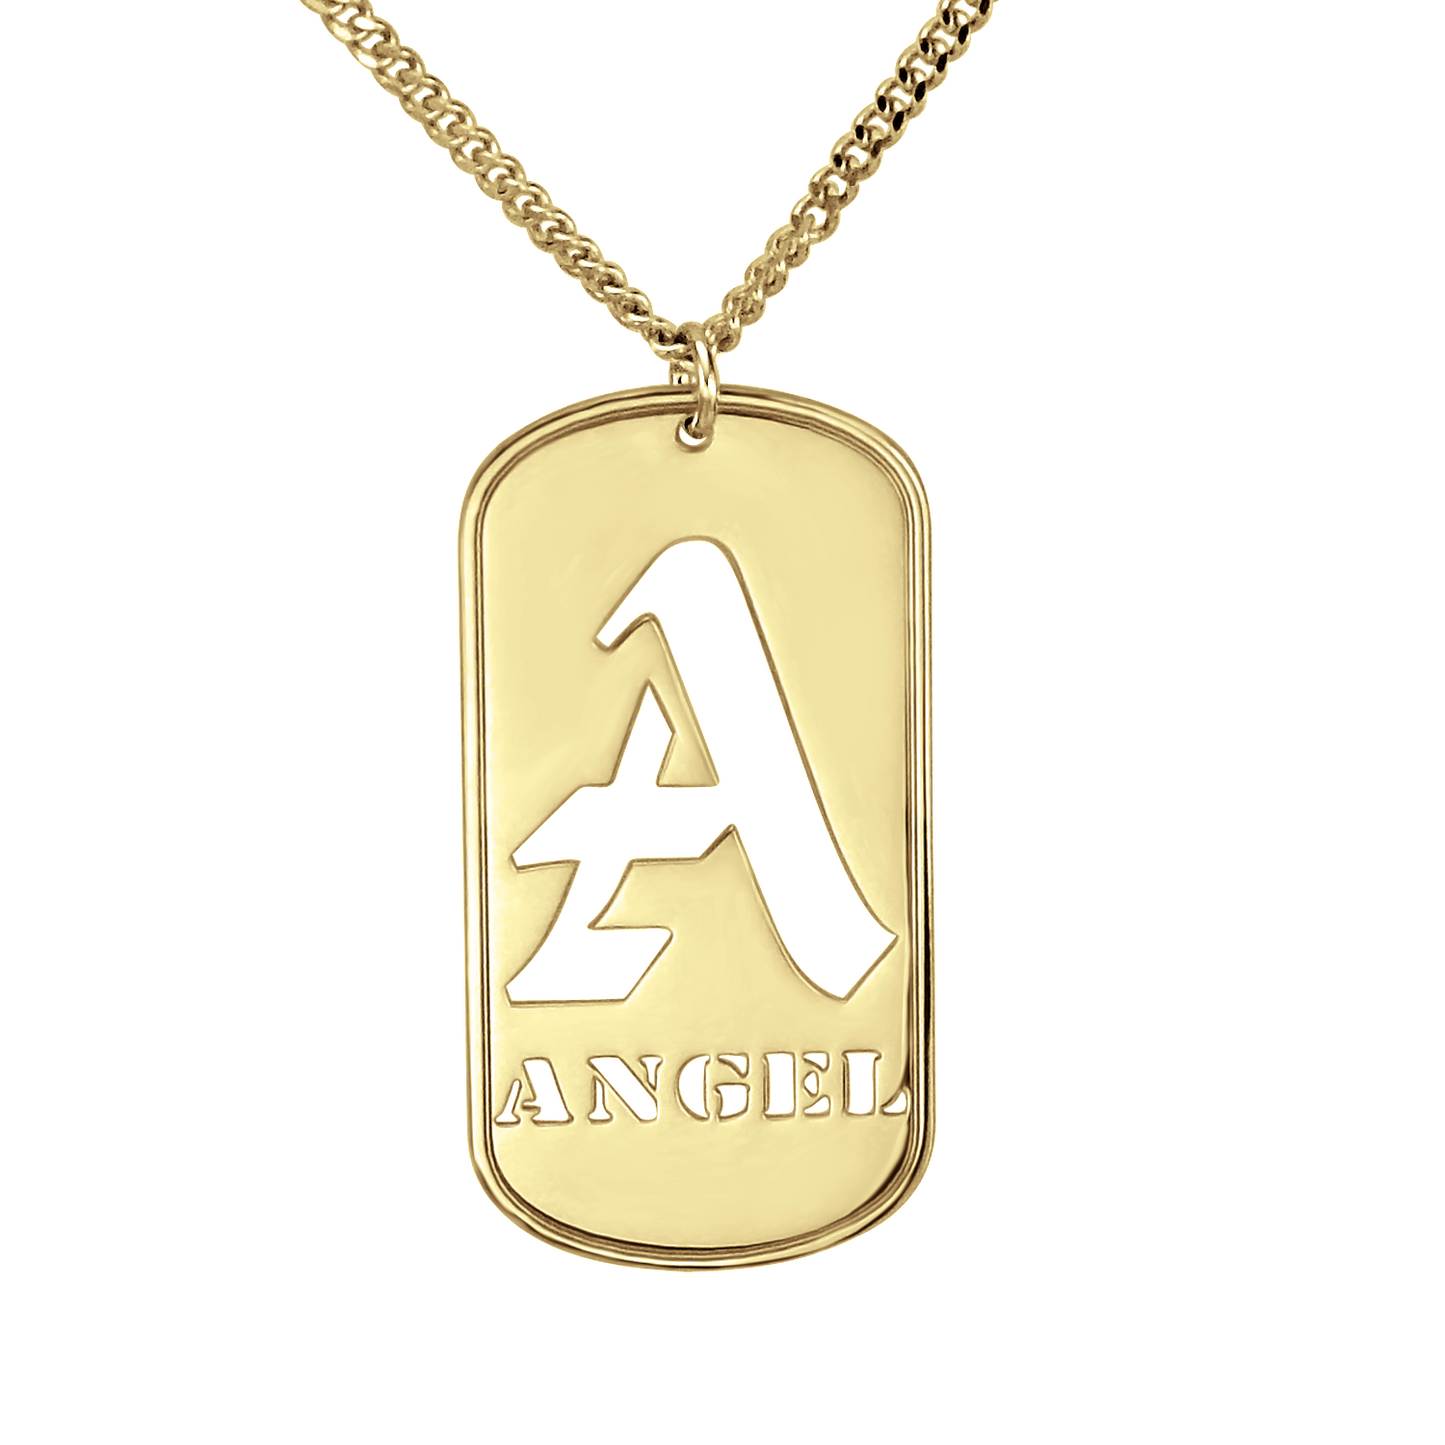 Personalized Gold Mens Dog Tag Necklace - Initial and Name